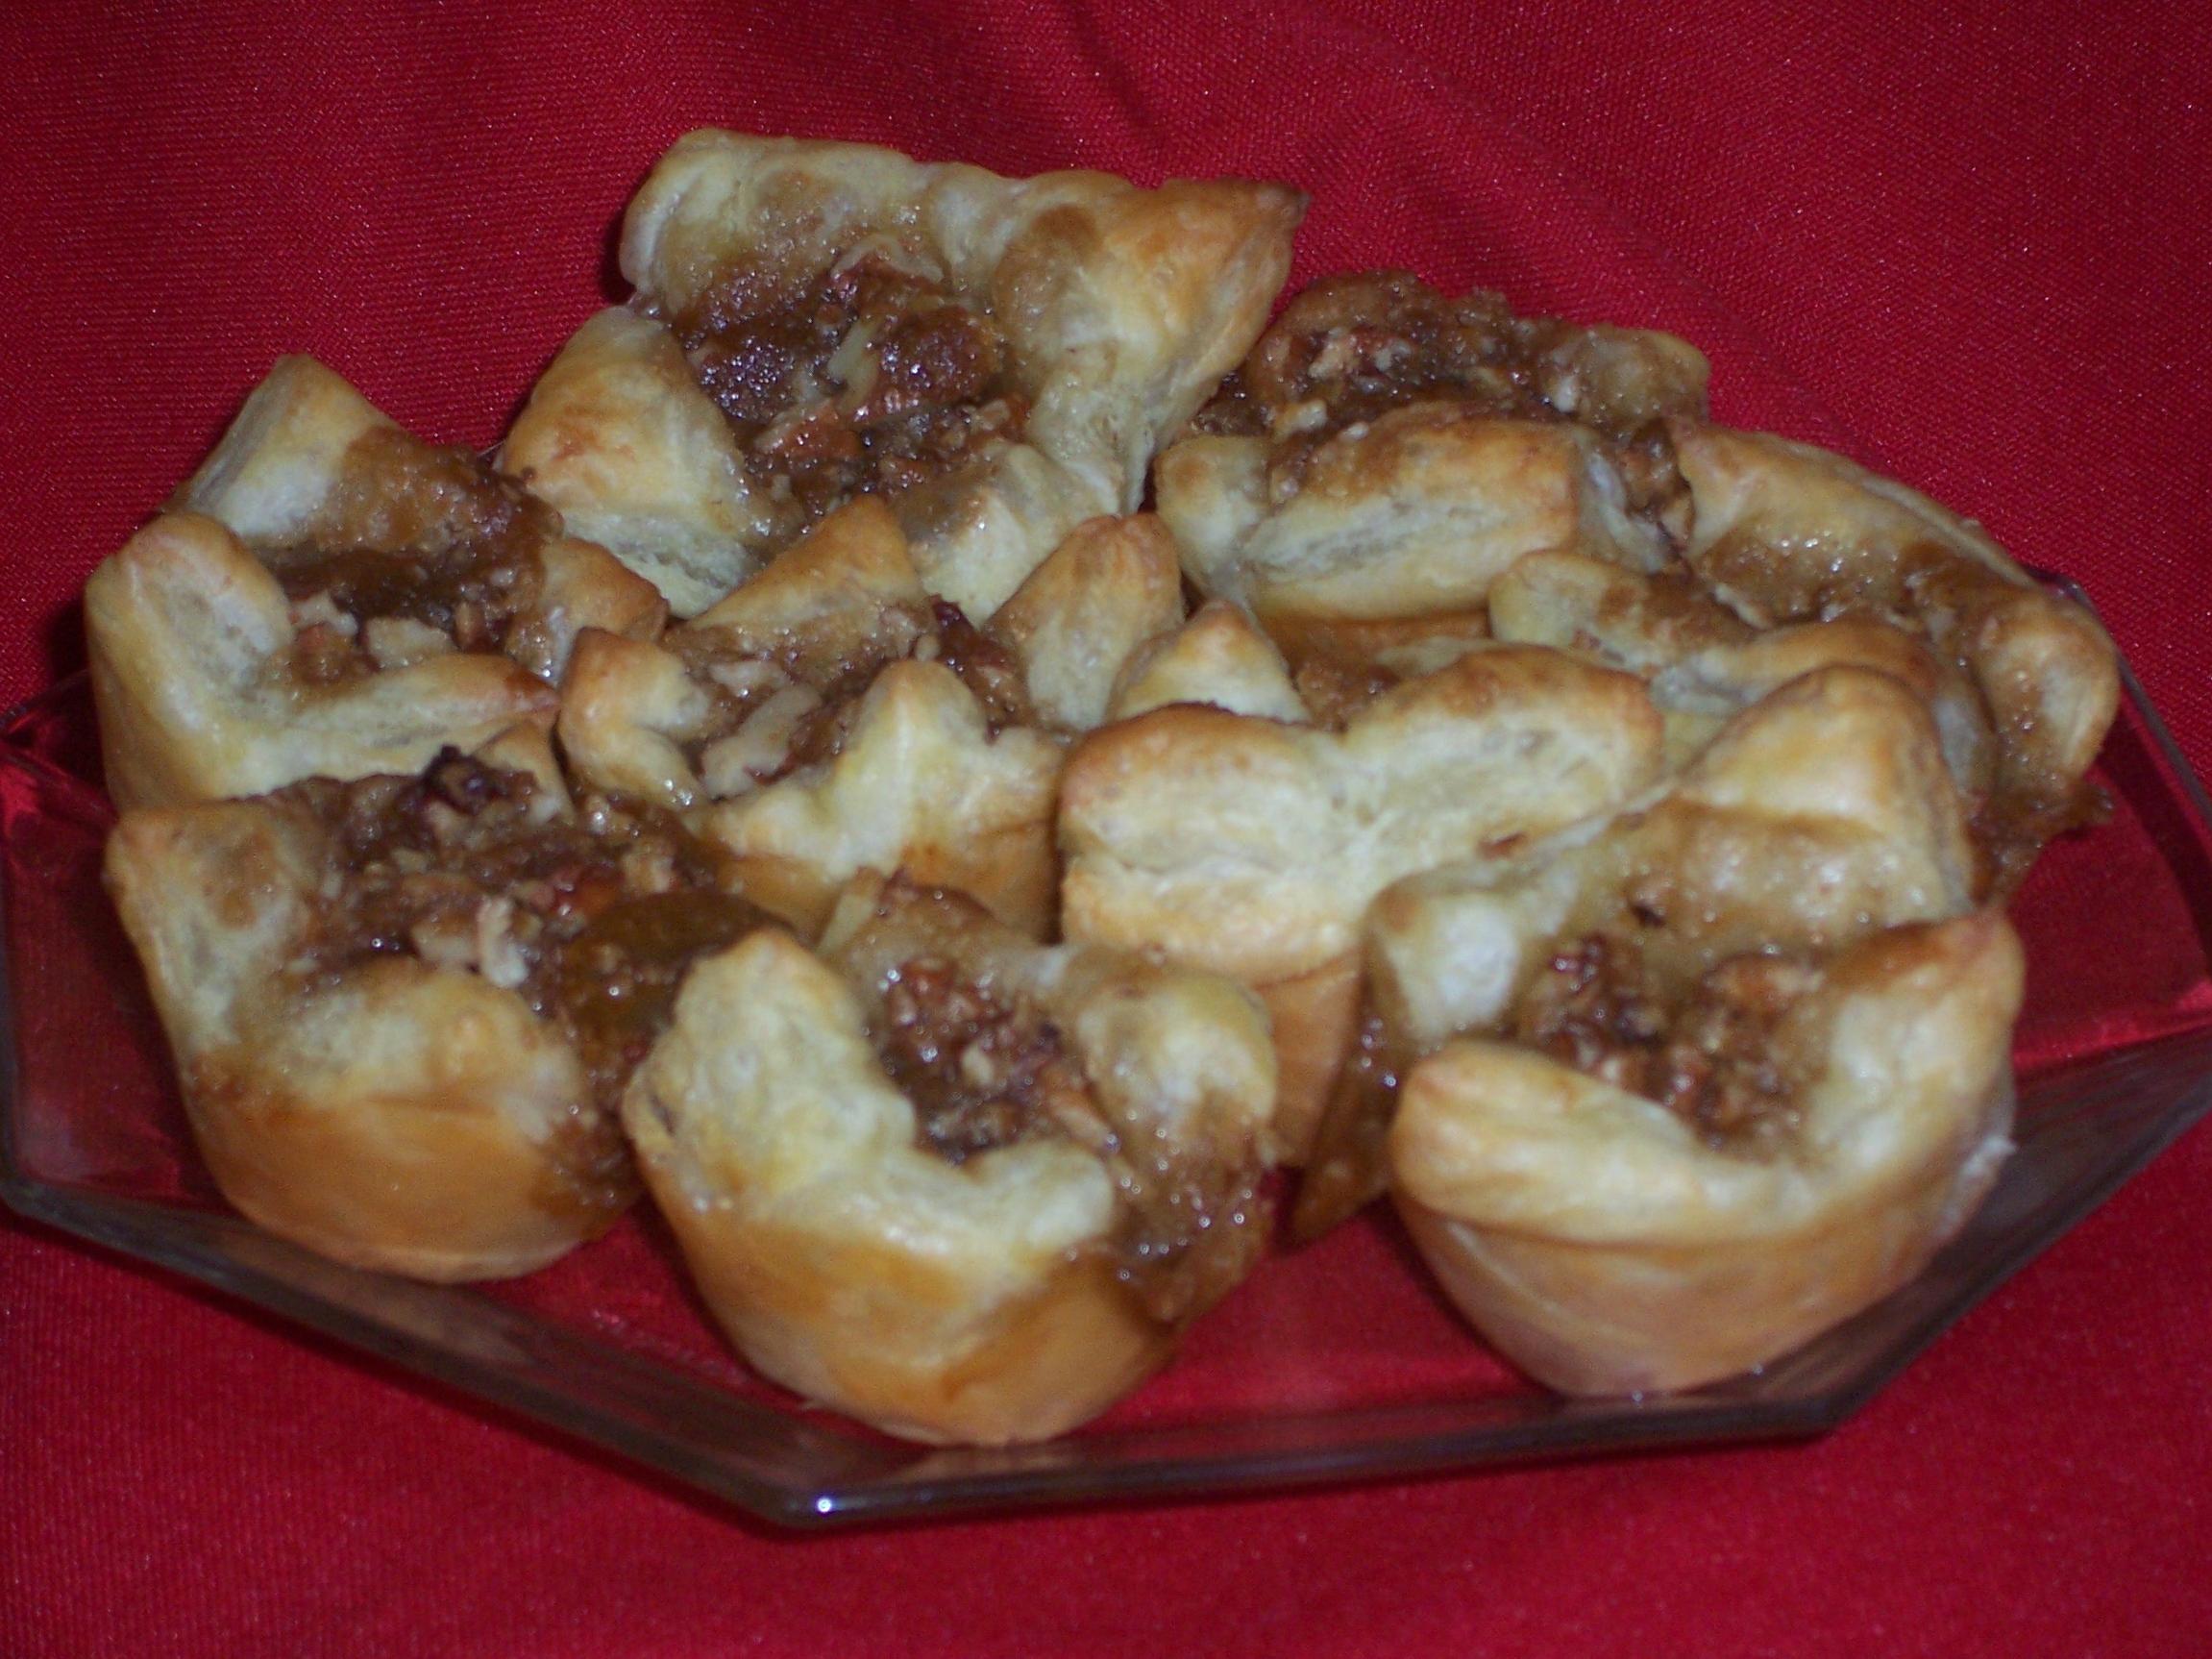  These Southern Pecan Puffs are like little clouds of pecan goodness!